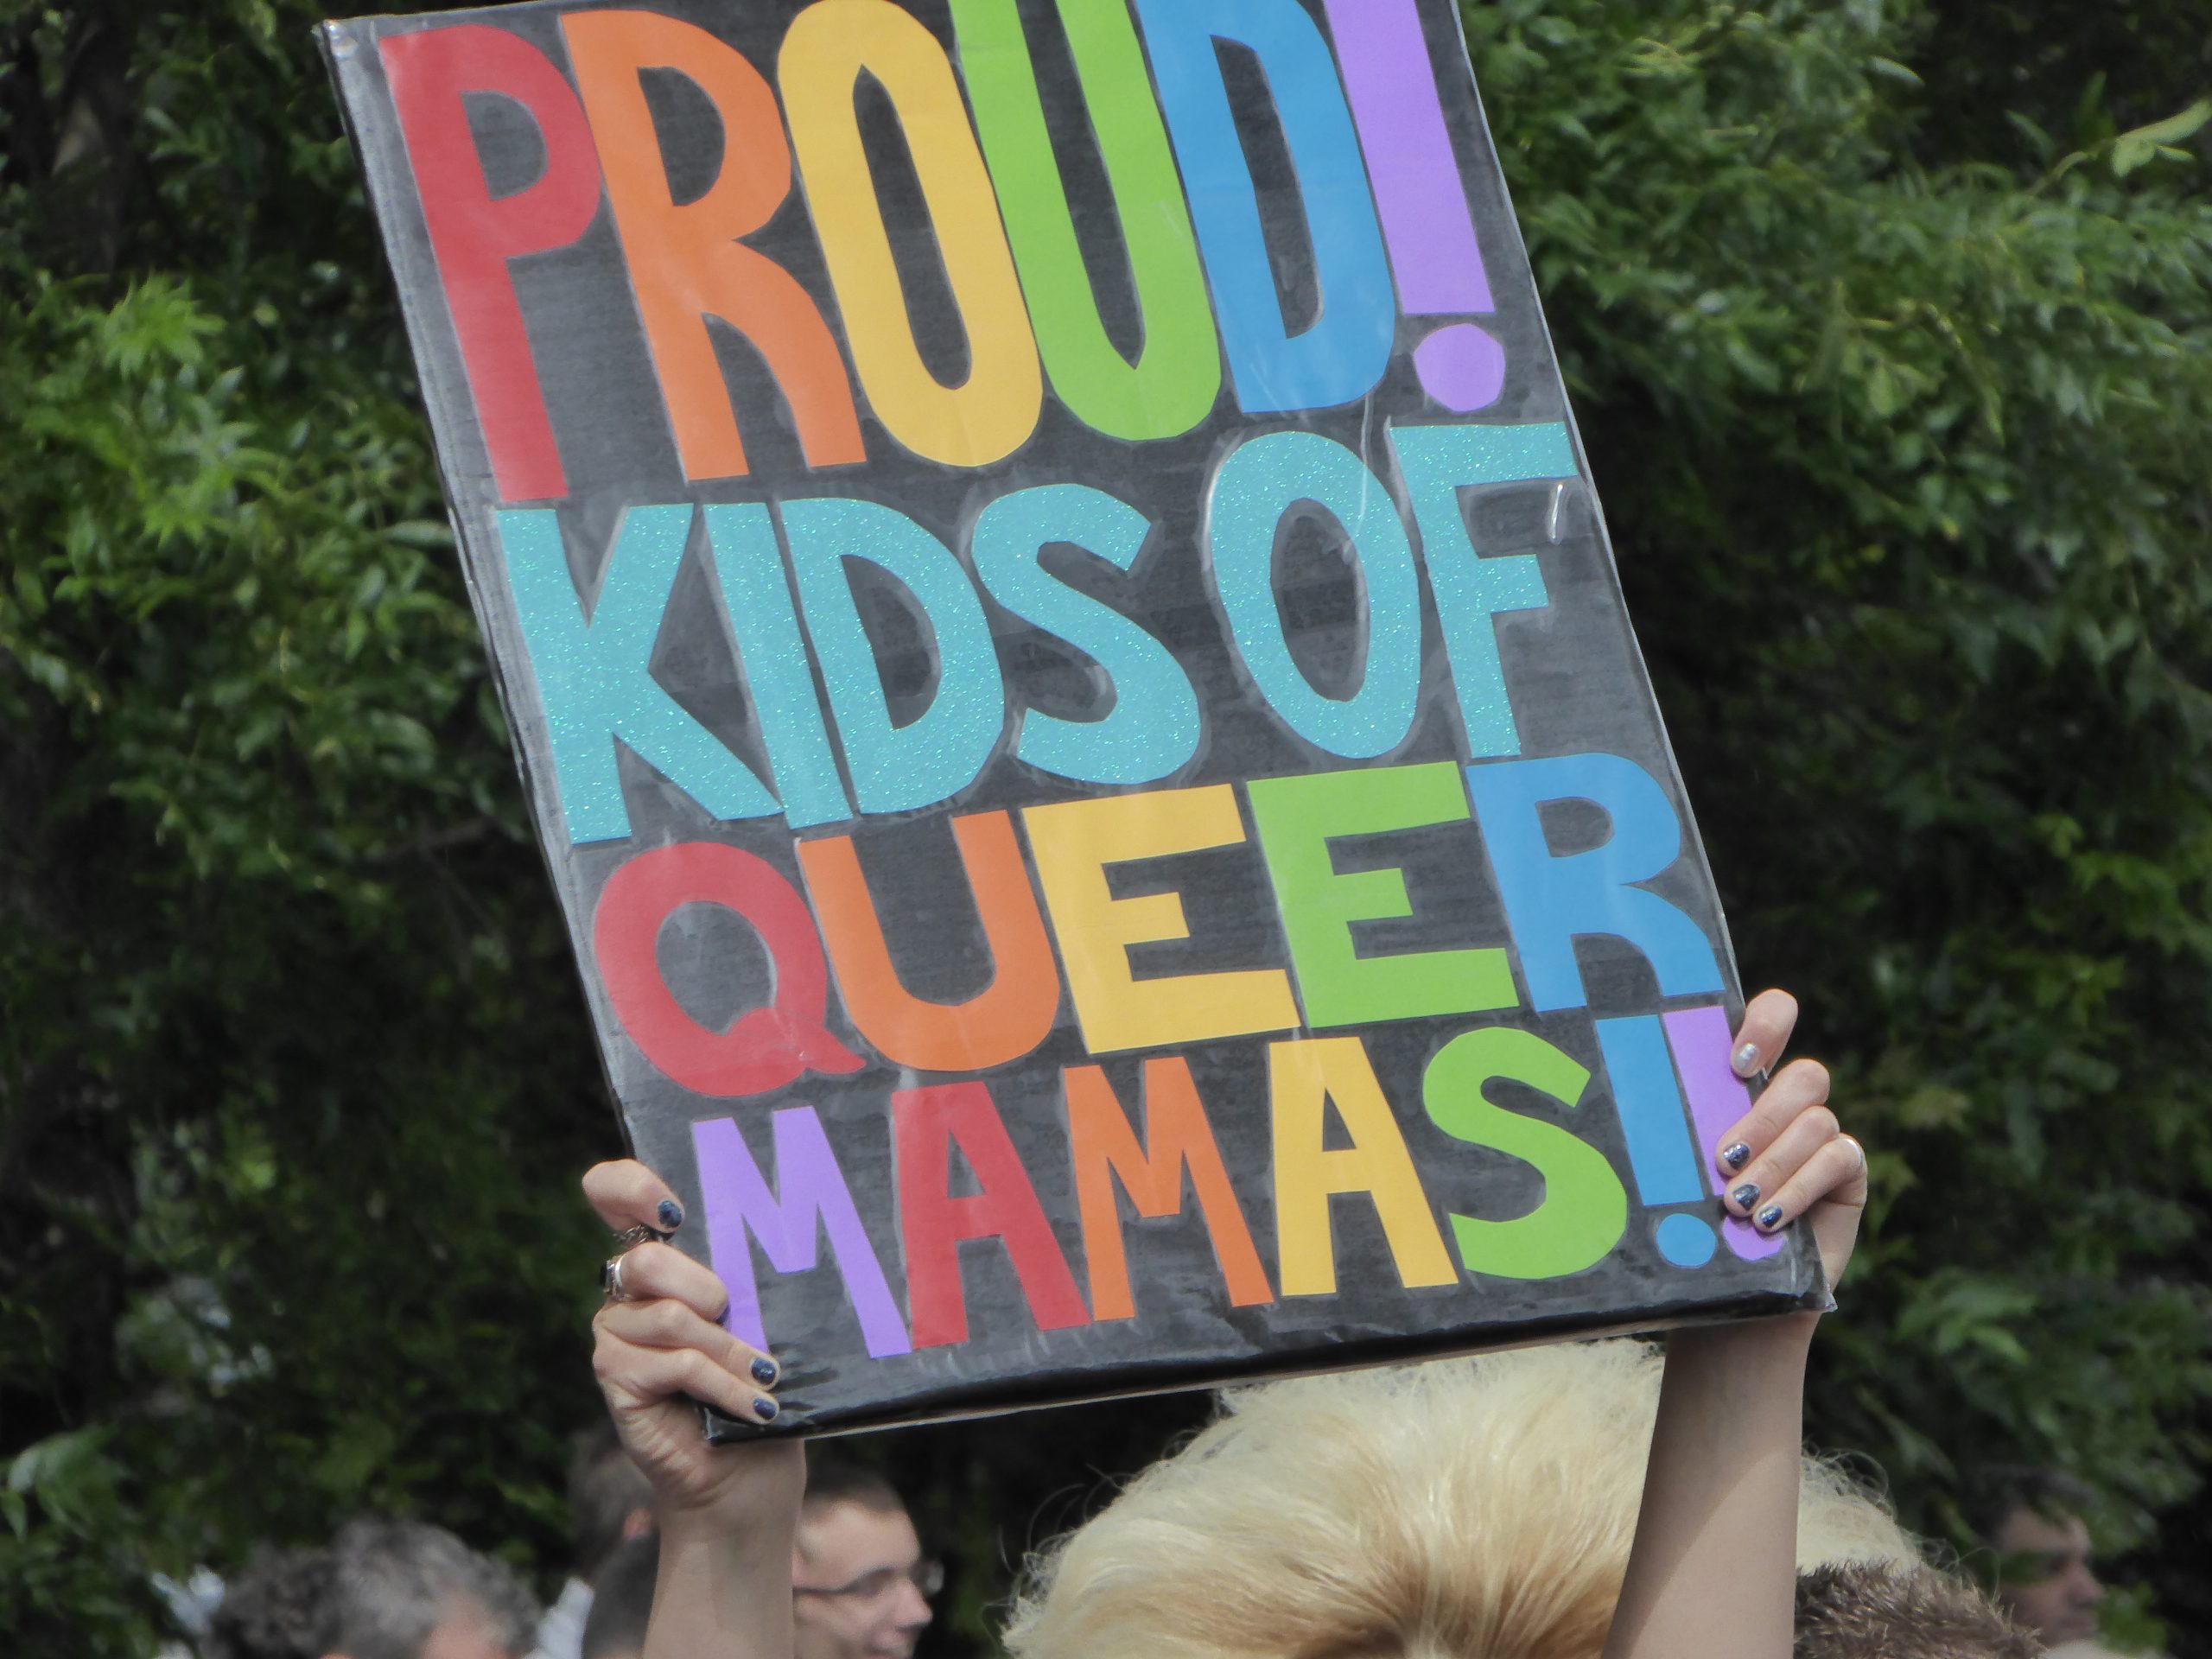 A sign is held up that says "PROUD! KIDS OF QUEER MAMAS!!"